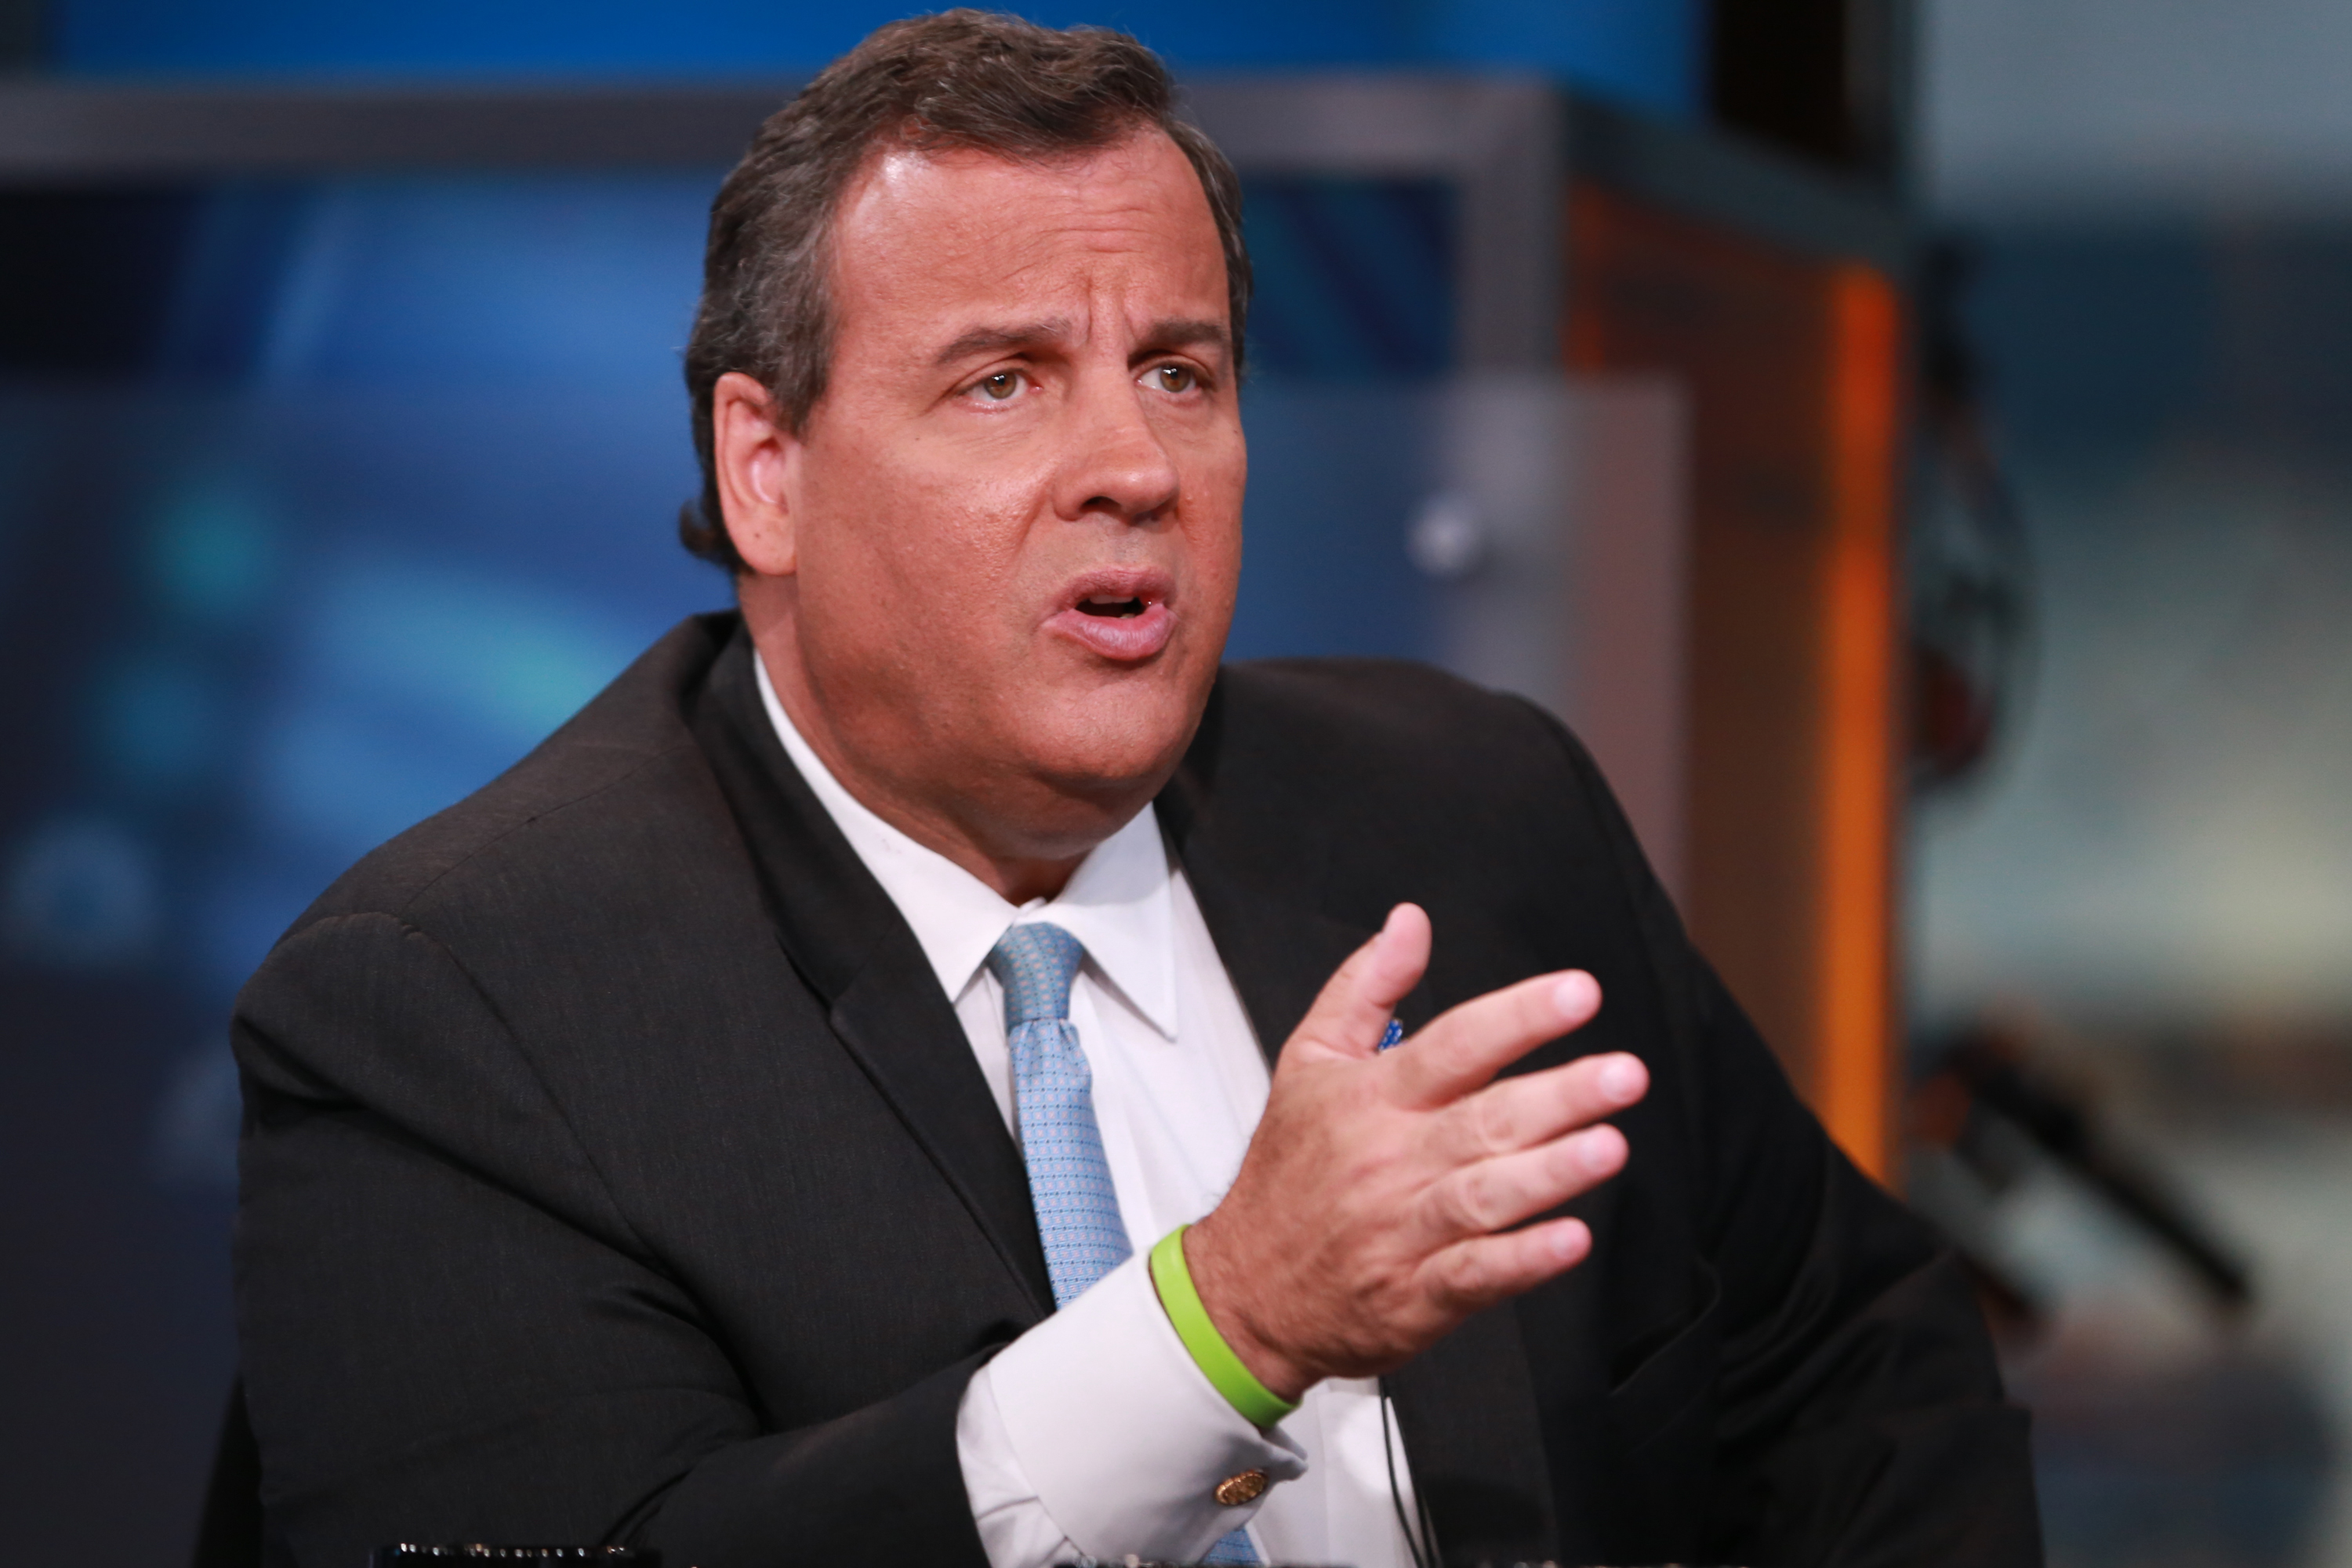 Gov. Chris Christie in an interview on Aug. 27, 2015. (David Orrell—CNBC/NBCU Photo Bank/Getty Images)